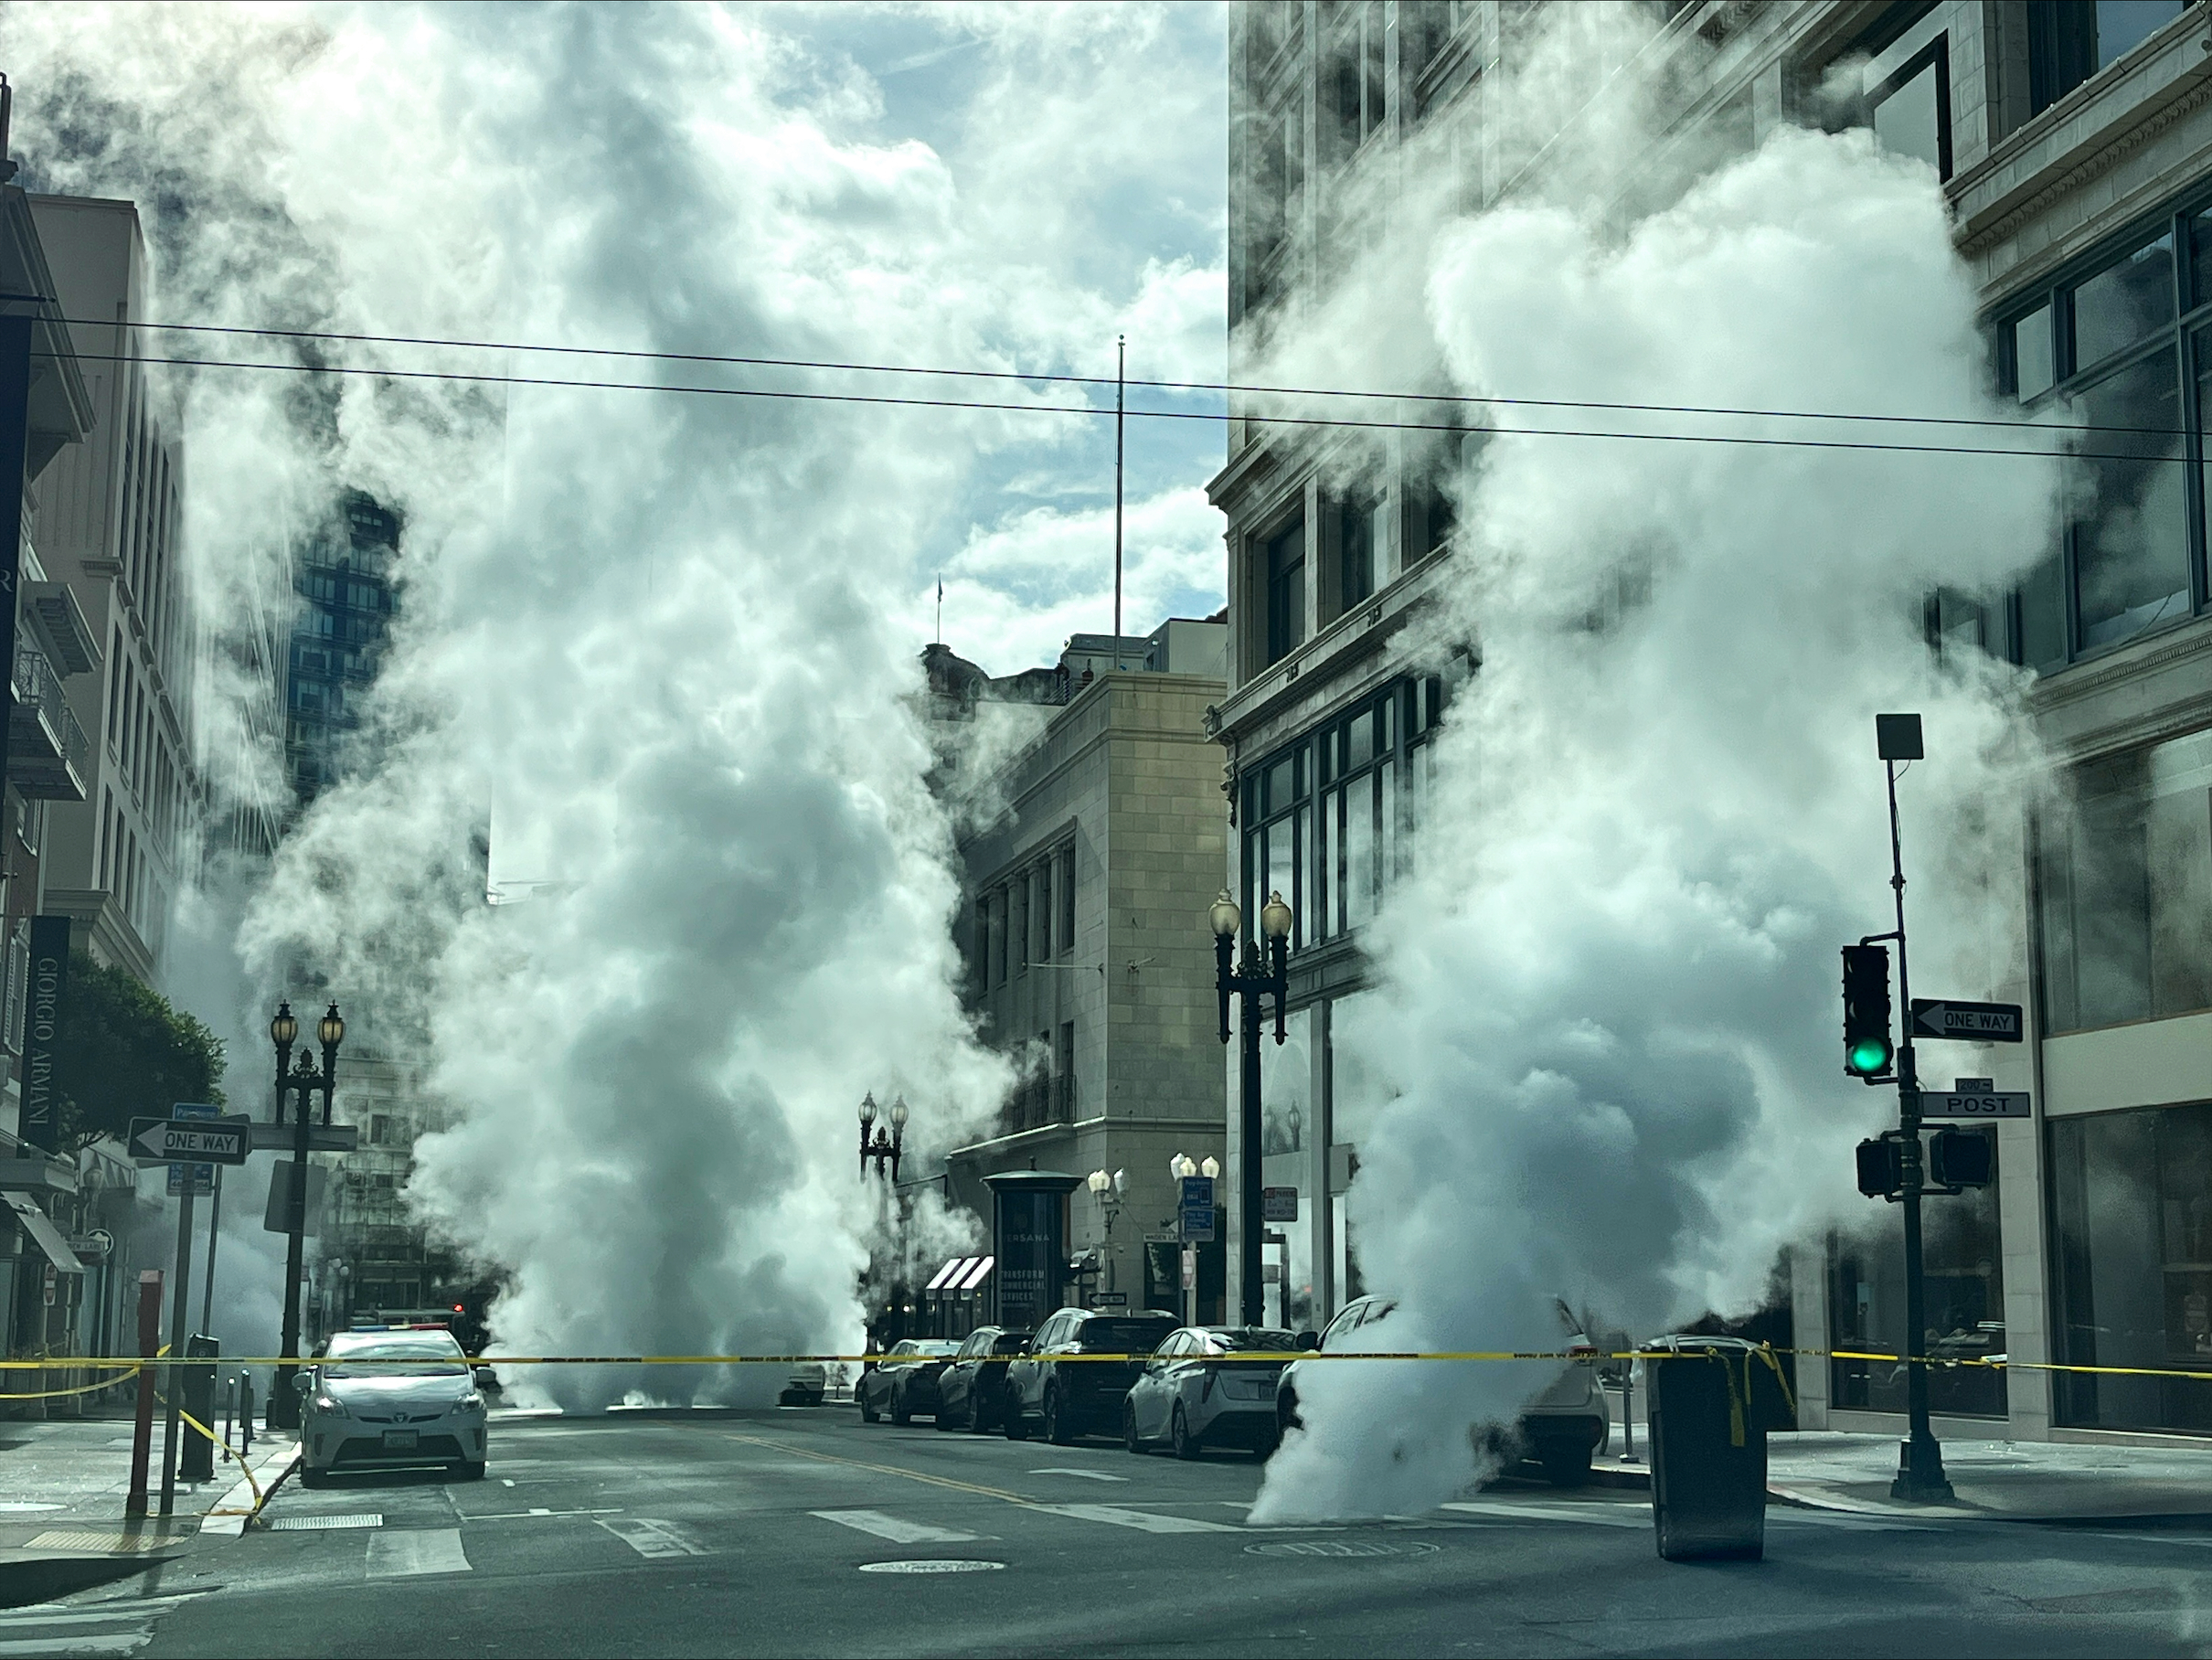 Clouds of steam rise from manholes in a stretch of a downtown city street.